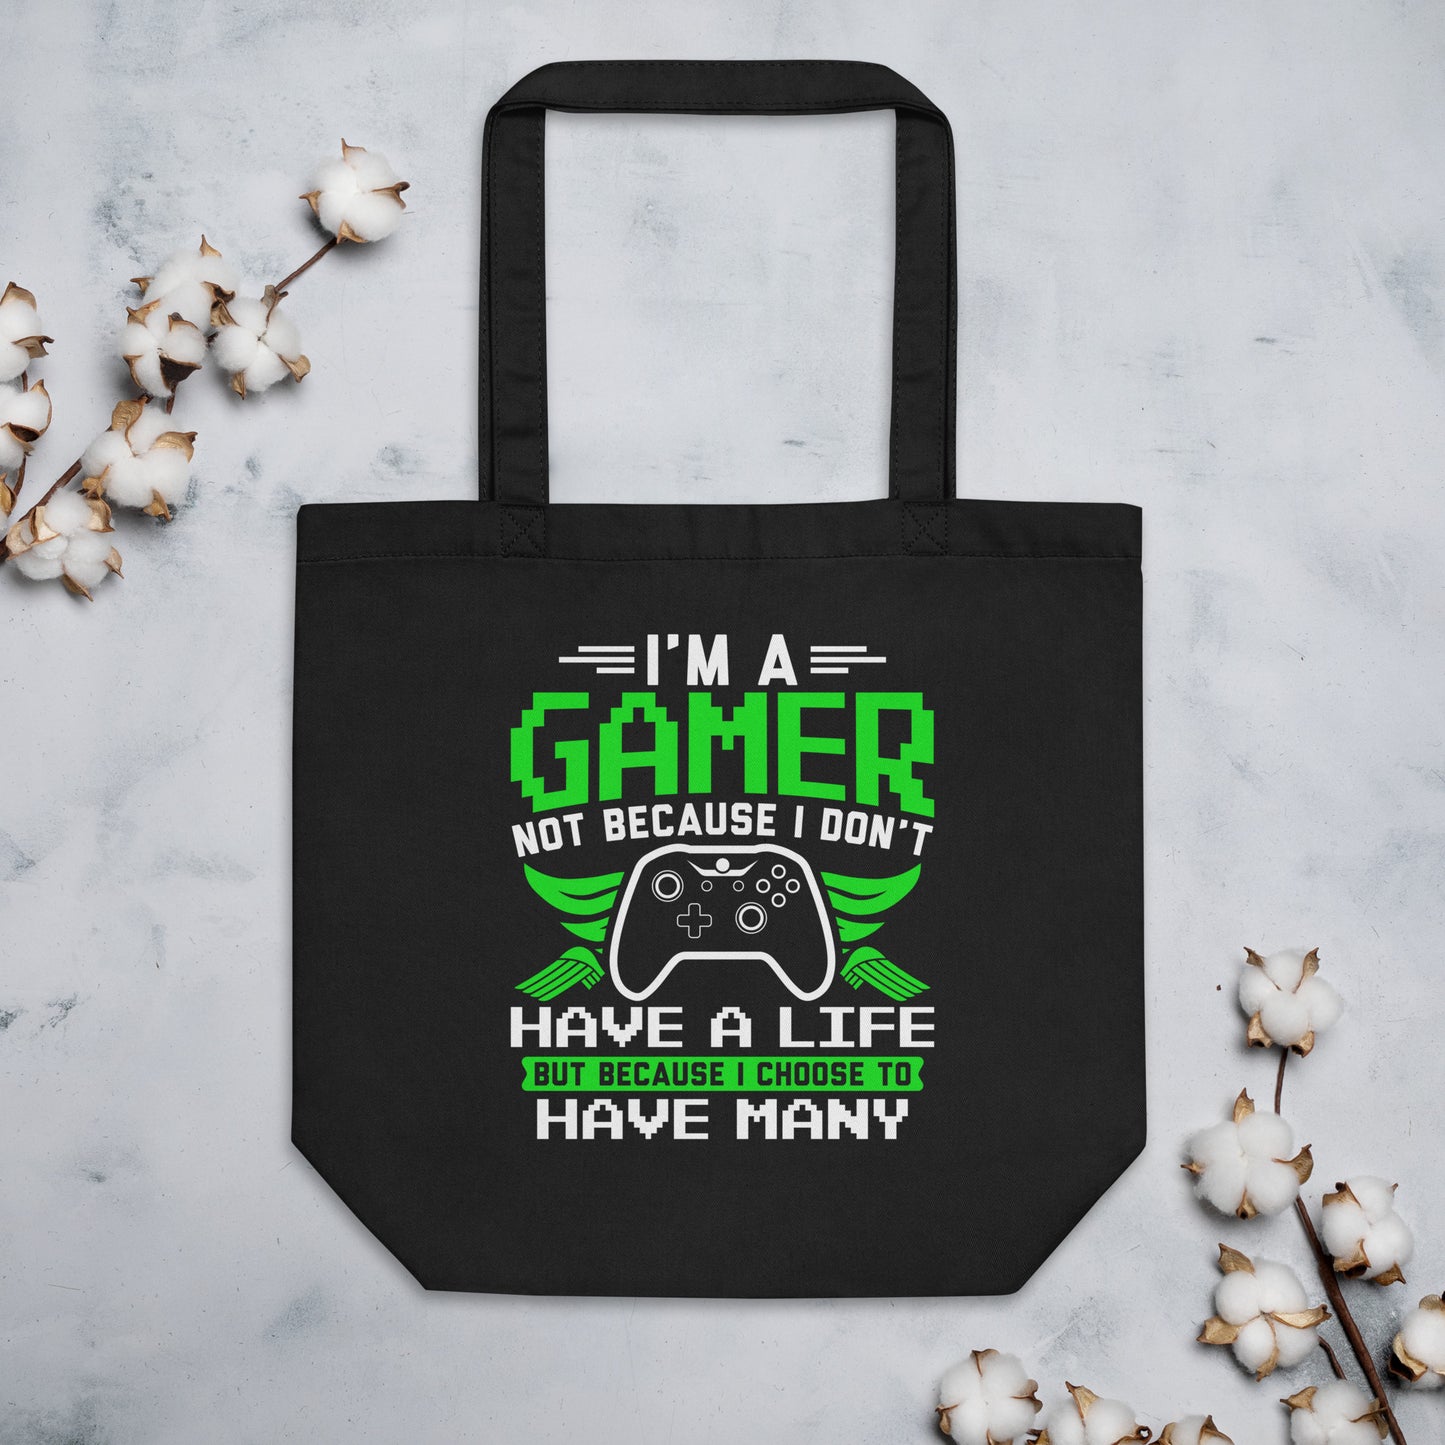 I'm a Gamer Not Because I Don't Have a Life Eco Tote Bag